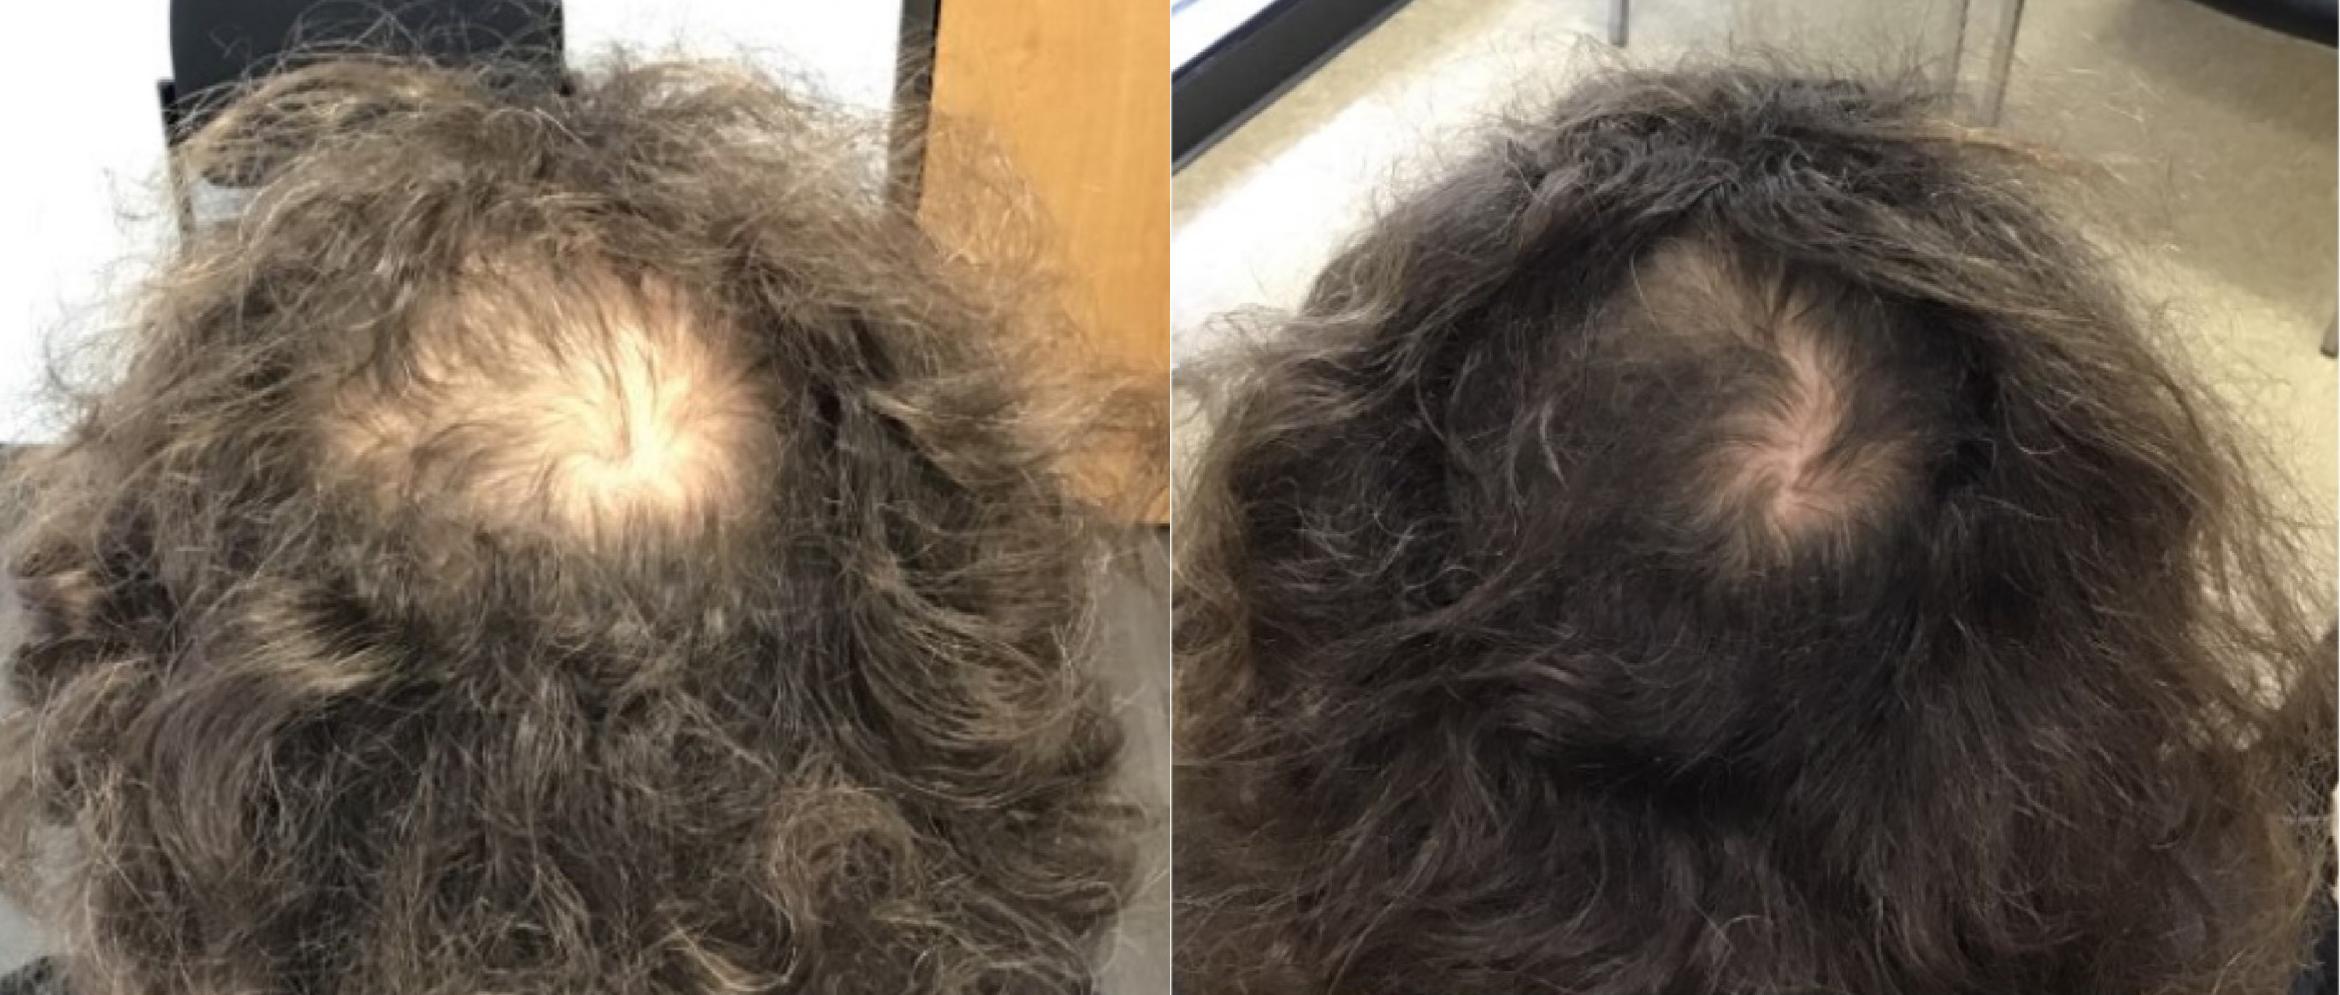 The crown of a patient's head before hair restoration and 7 months after treatment showing hair regrowth.